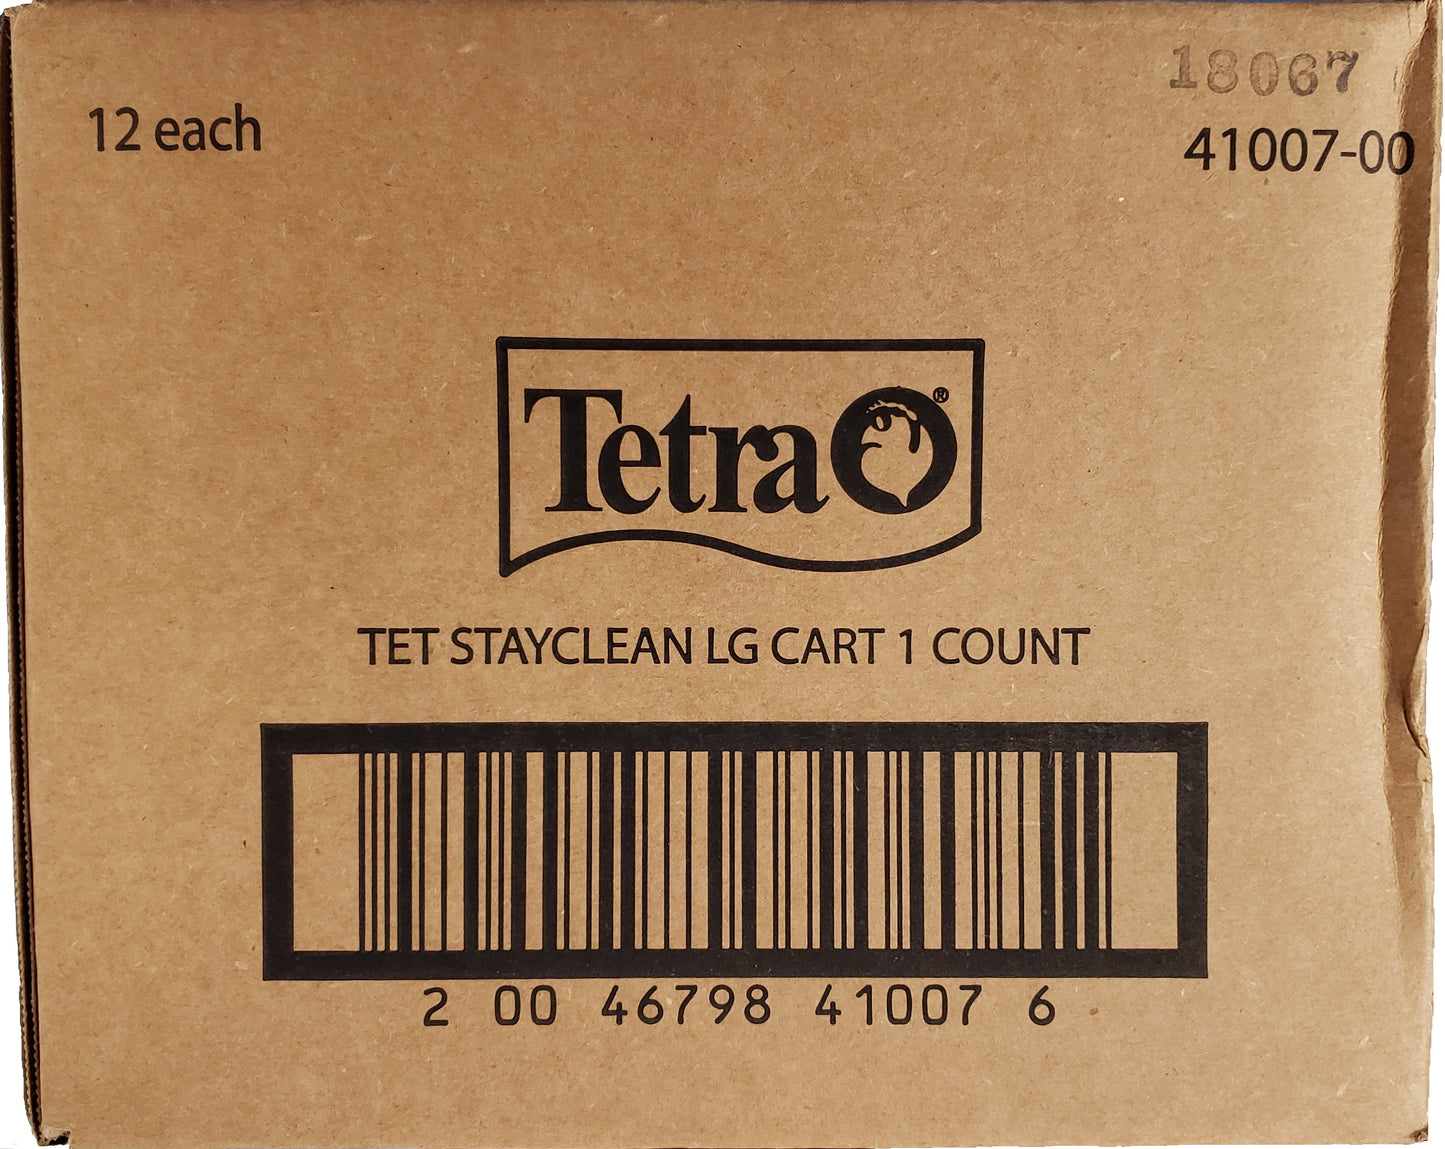 Tetra Bio-Bag Cartridges with StayClean Large - Aquatic Connect